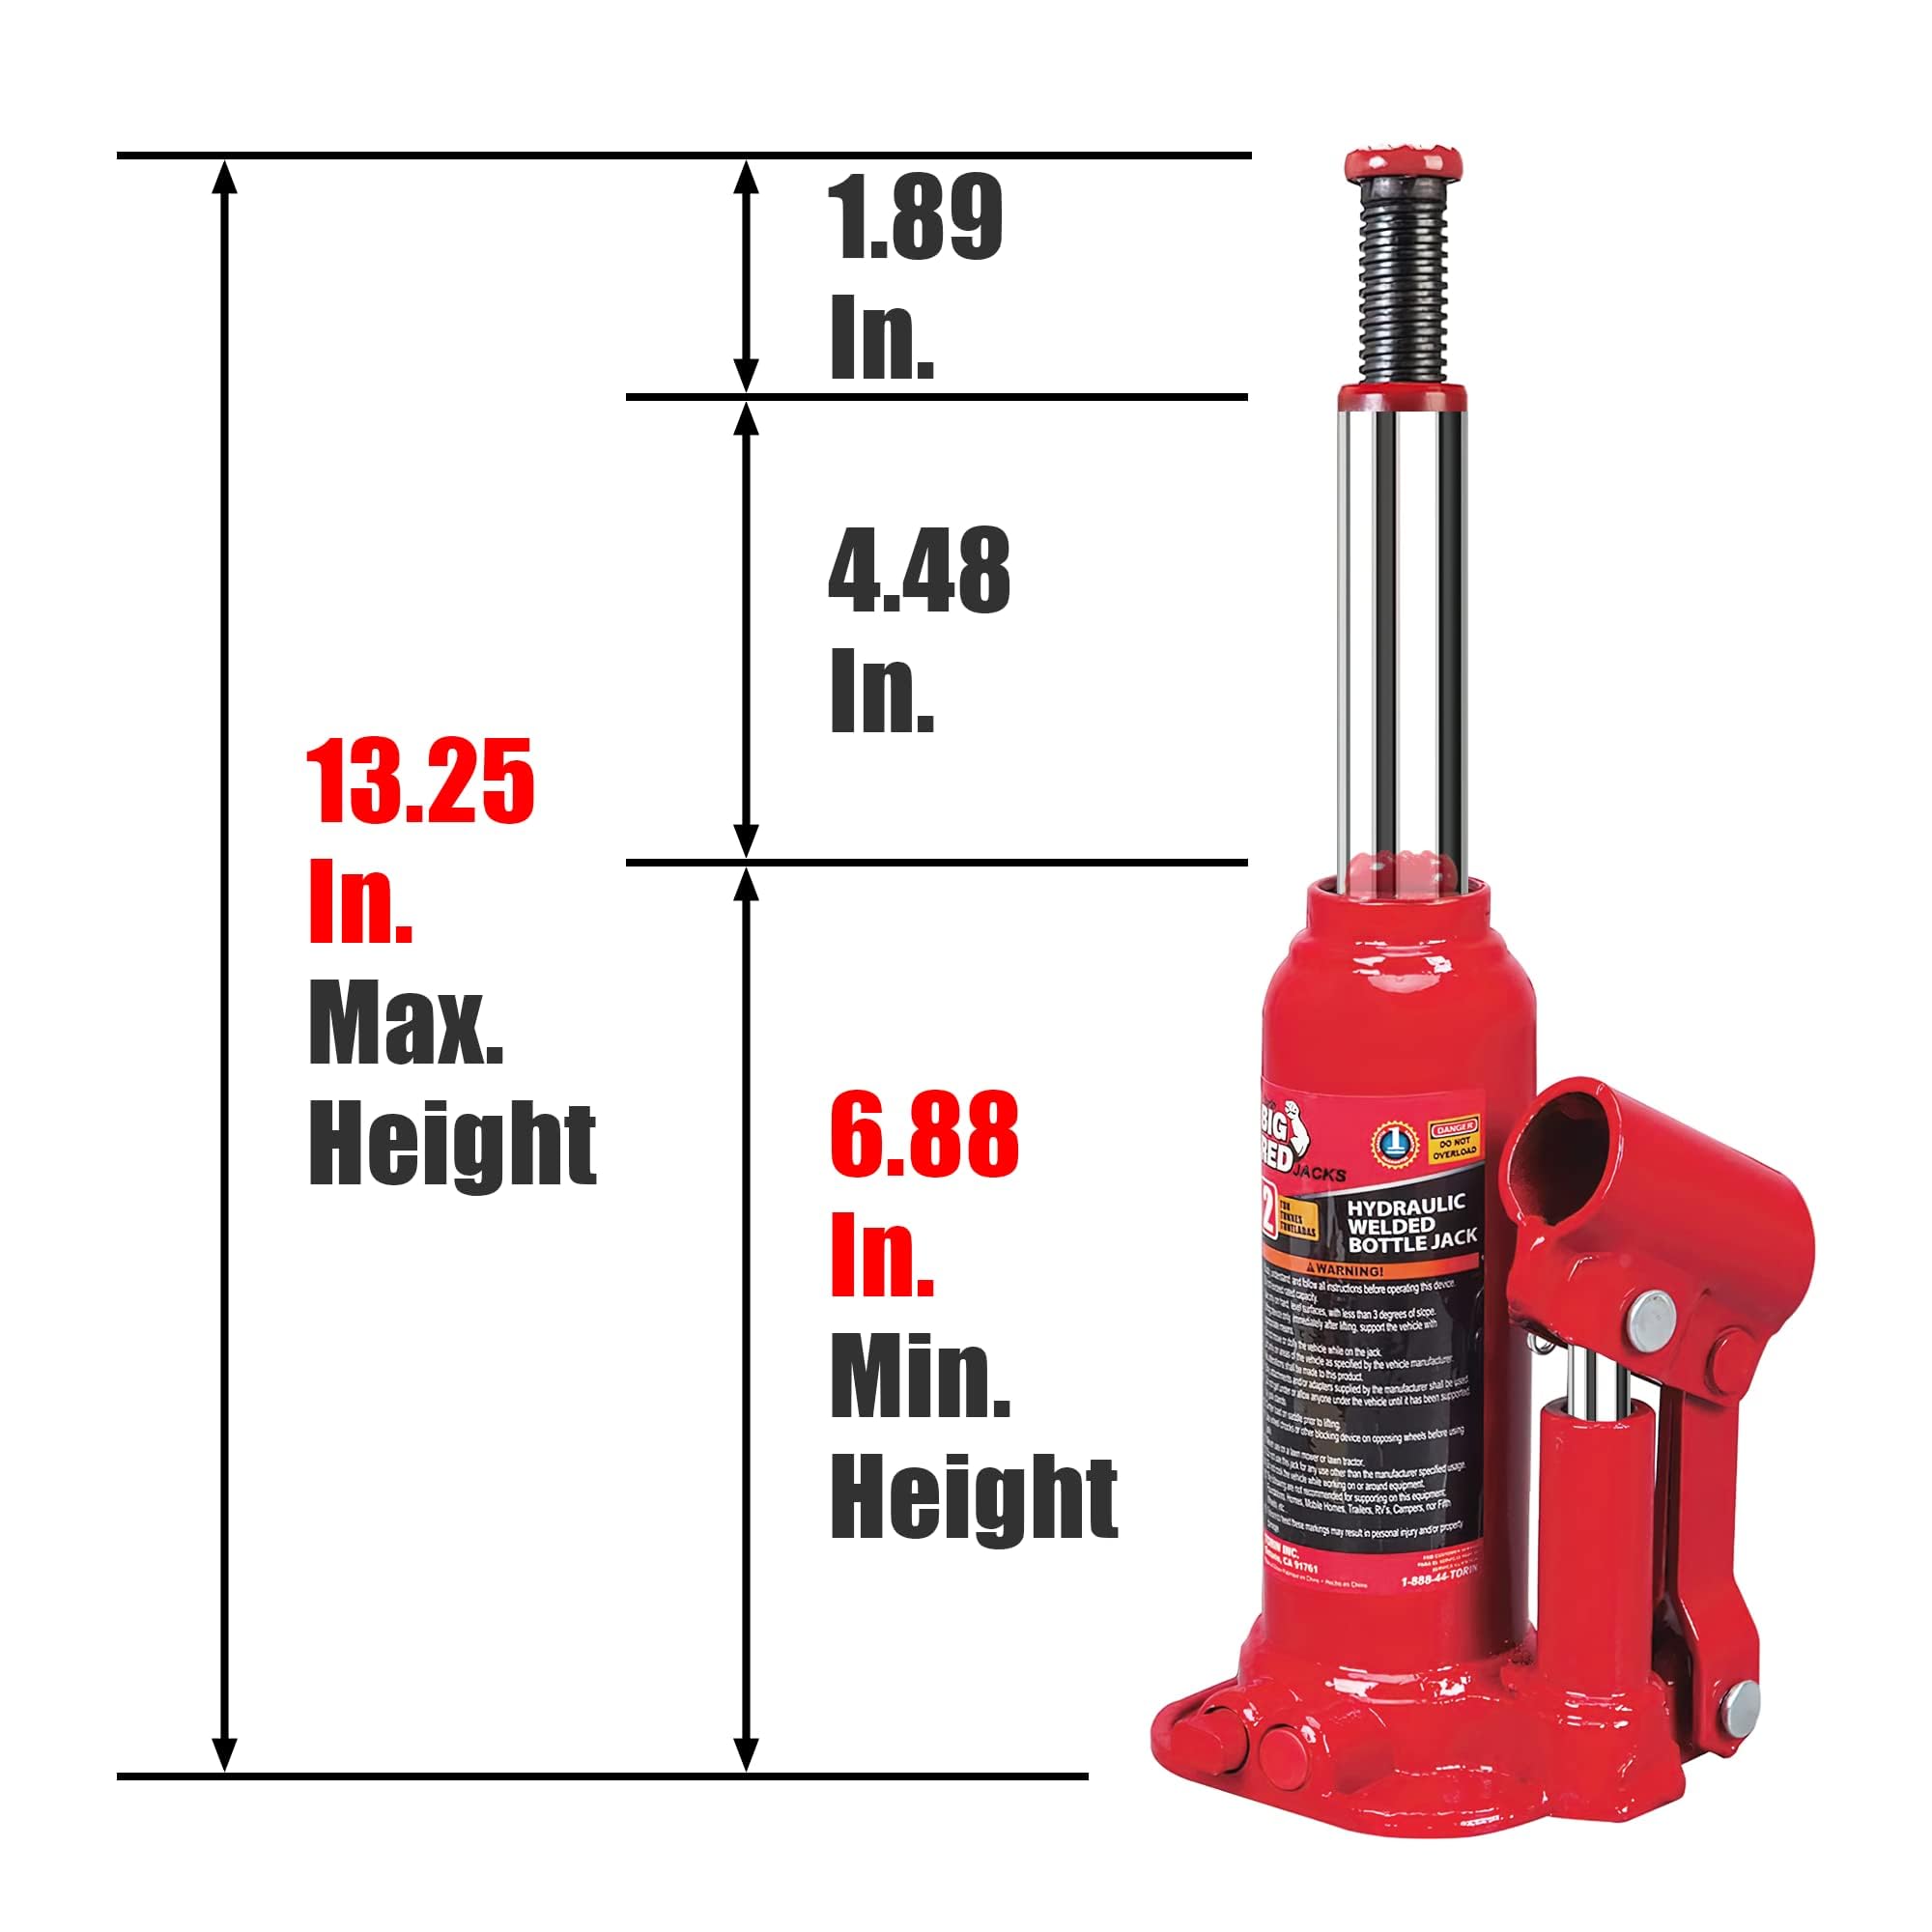 BIG RED T90203B-1 Torin Hydraulic Welded Bottle Jack, 2 Ton (4,000 lb.) Capacity, Red